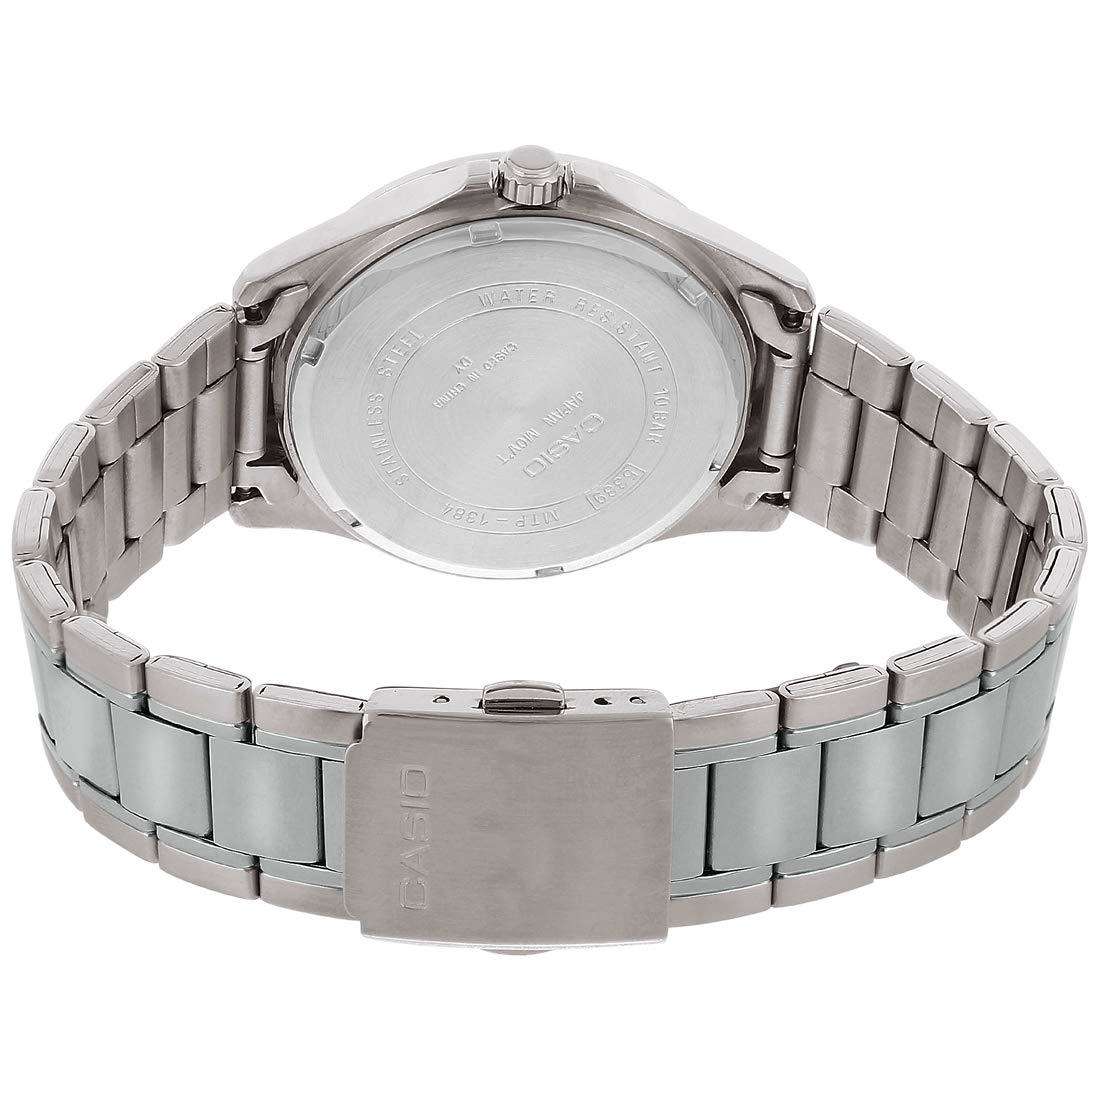 Casio MTP-1384D-7AVDF Silver Stainless Watch for Men-Watch Portal Philippines